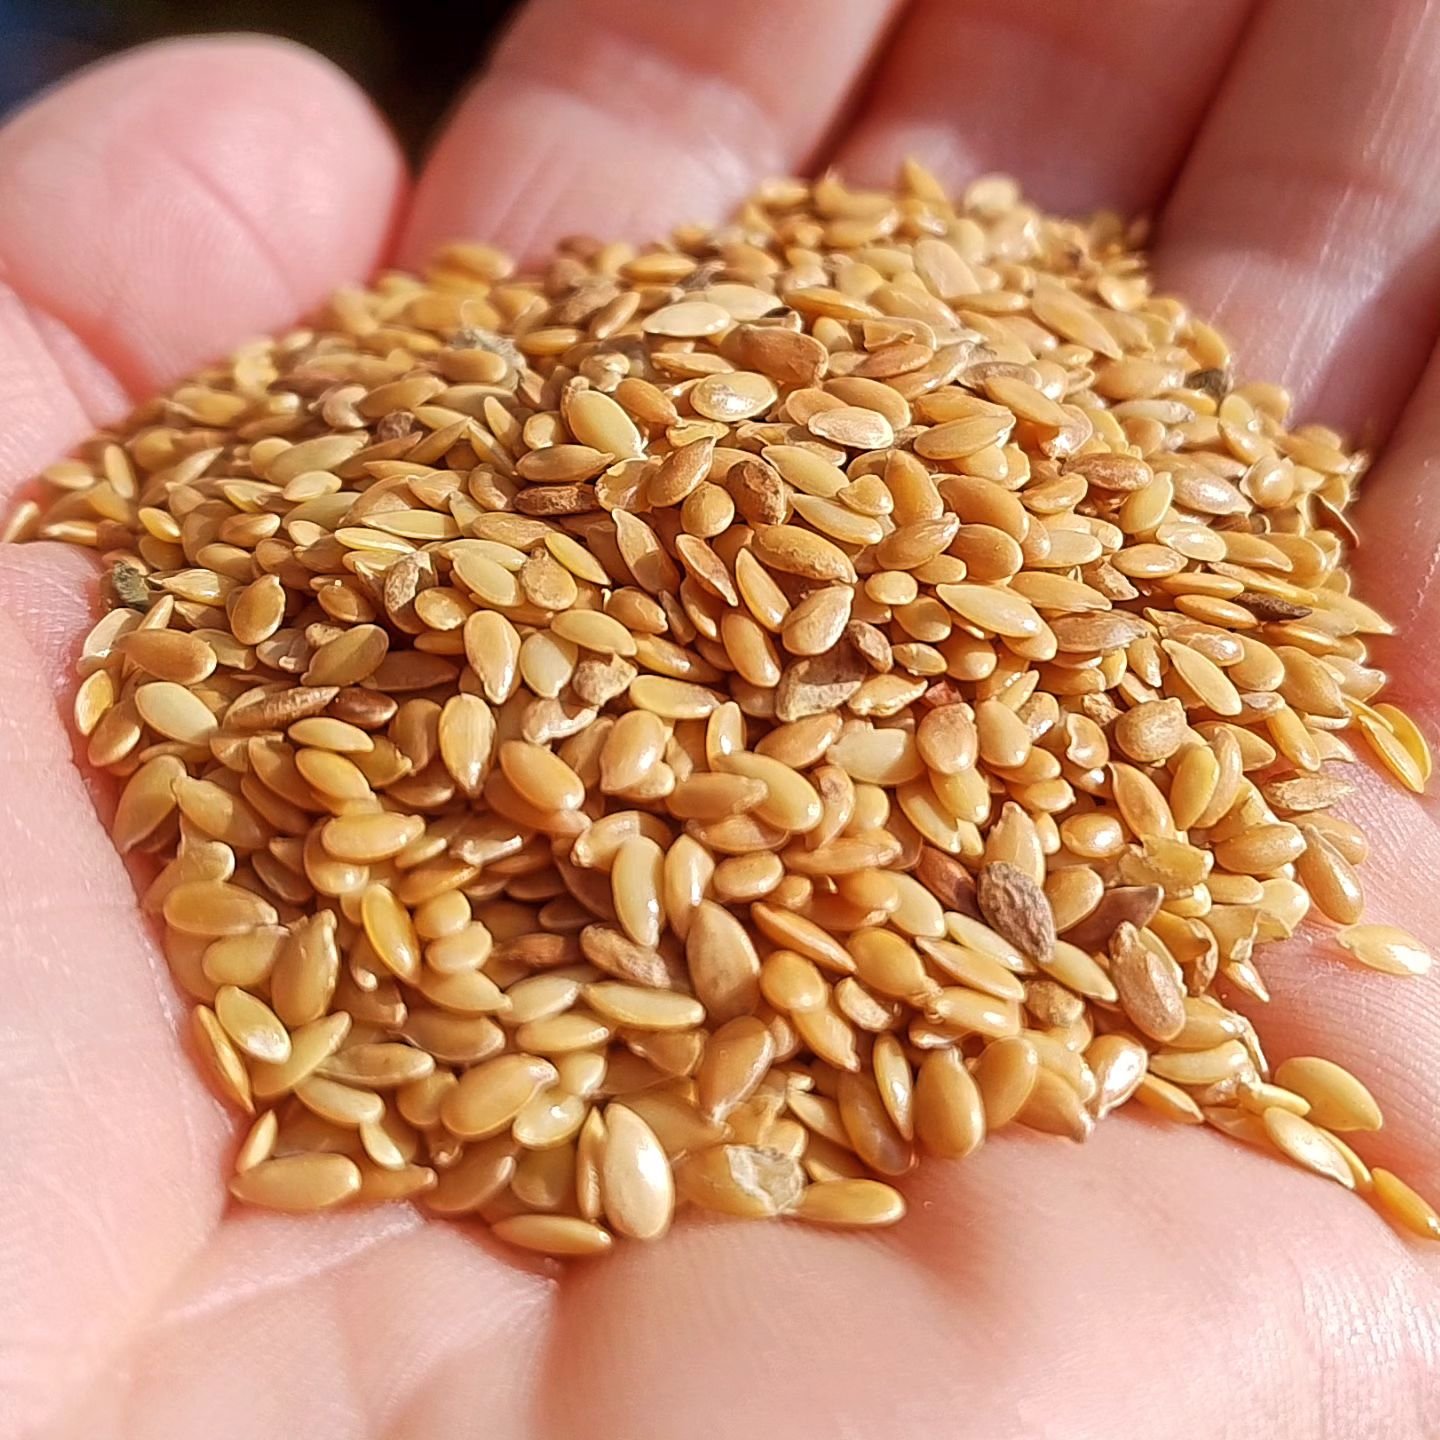 I've been extolling the virtues of linseed with a few of our customers recently - they offer loads of health benefits.

Also known as flax, linseed come from the flax plant, which is also used to produce linen!

Linseed are rich in fatty acids, anti-